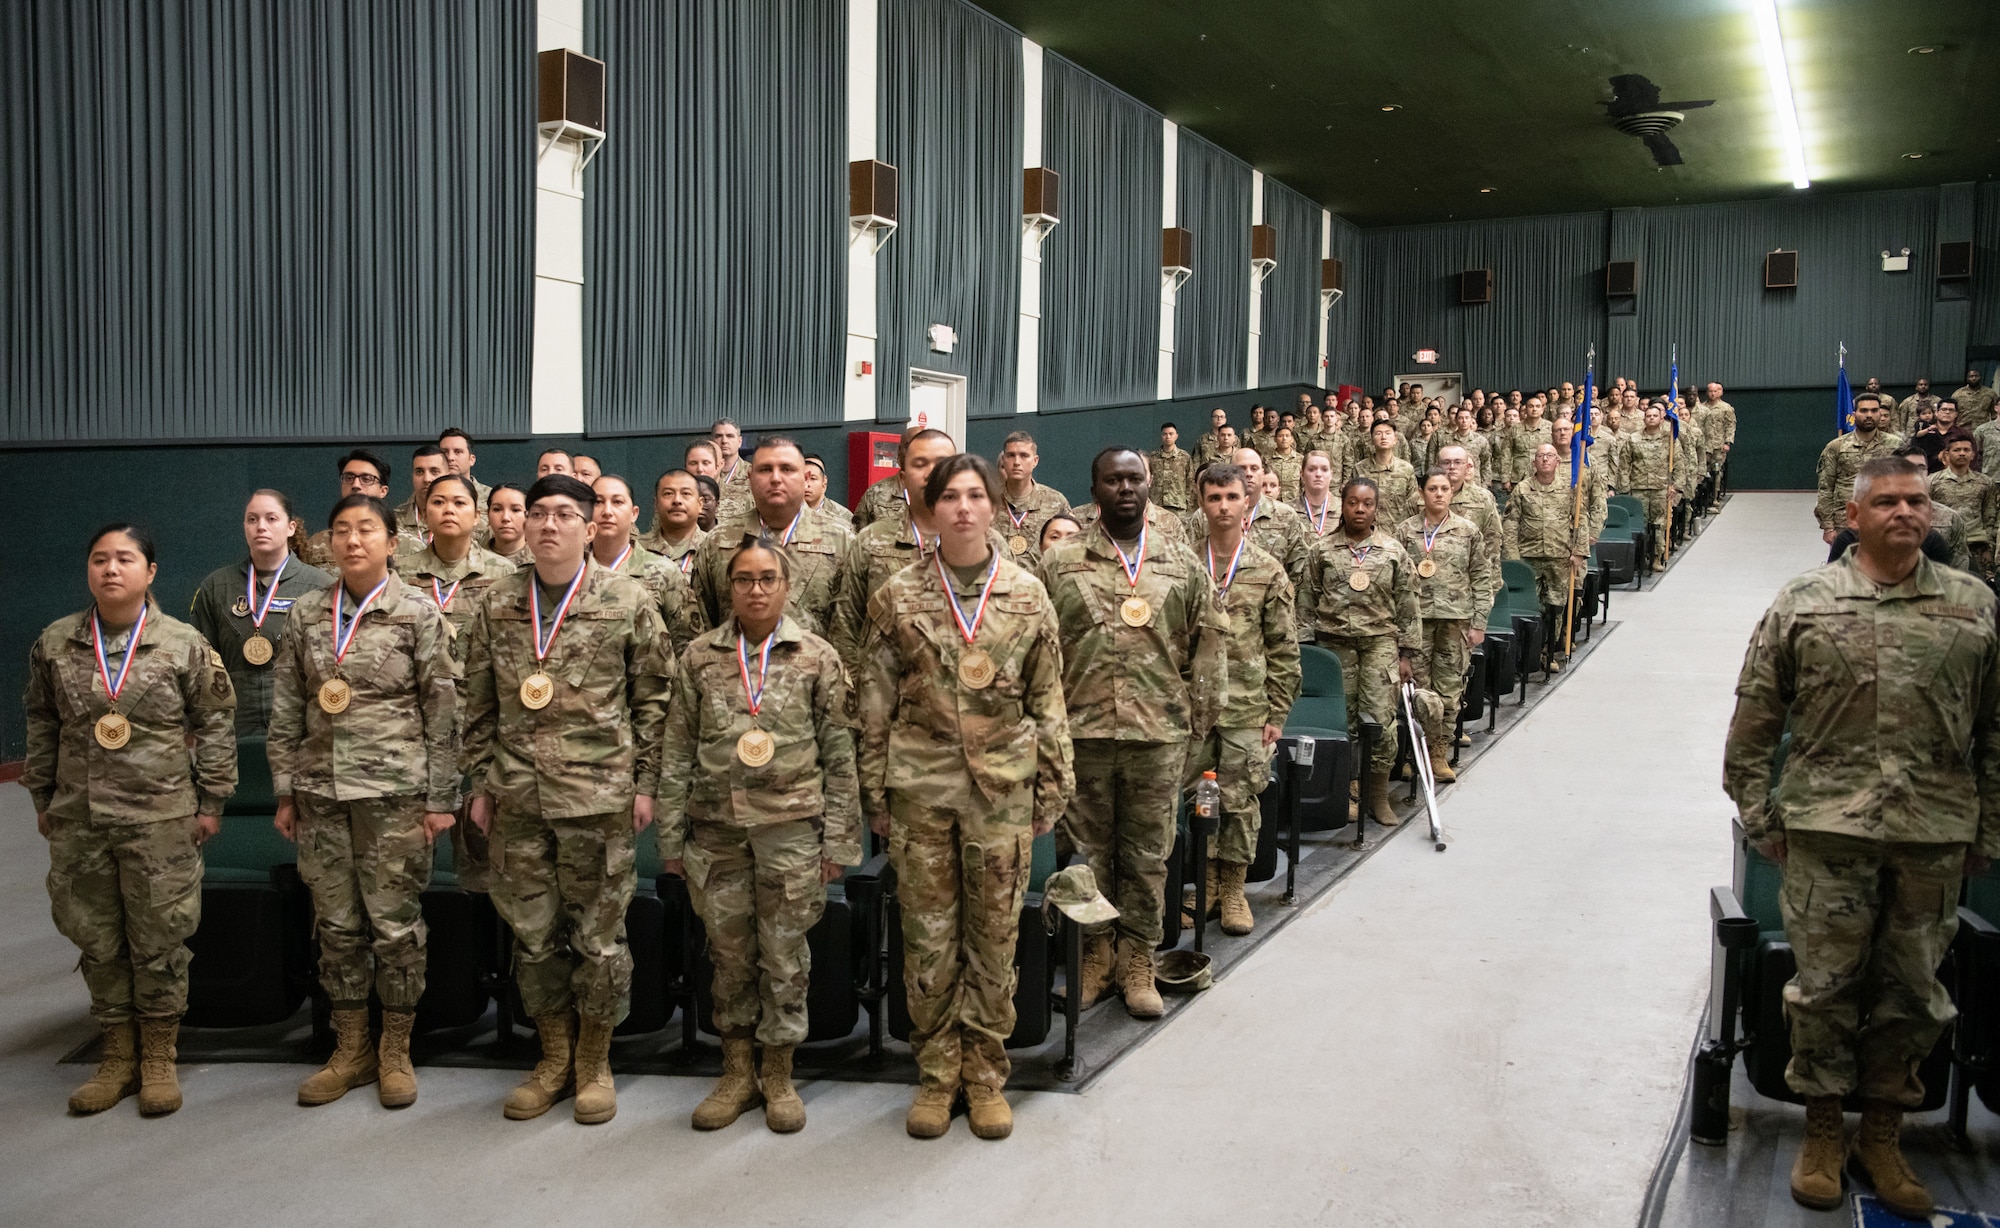 Members of the 349th Air Mobility Wing gathered to celebrate the achievement of many members who had achieved the rank of Non-Commissioned Officer or Senior Non-Commissioned Officer.